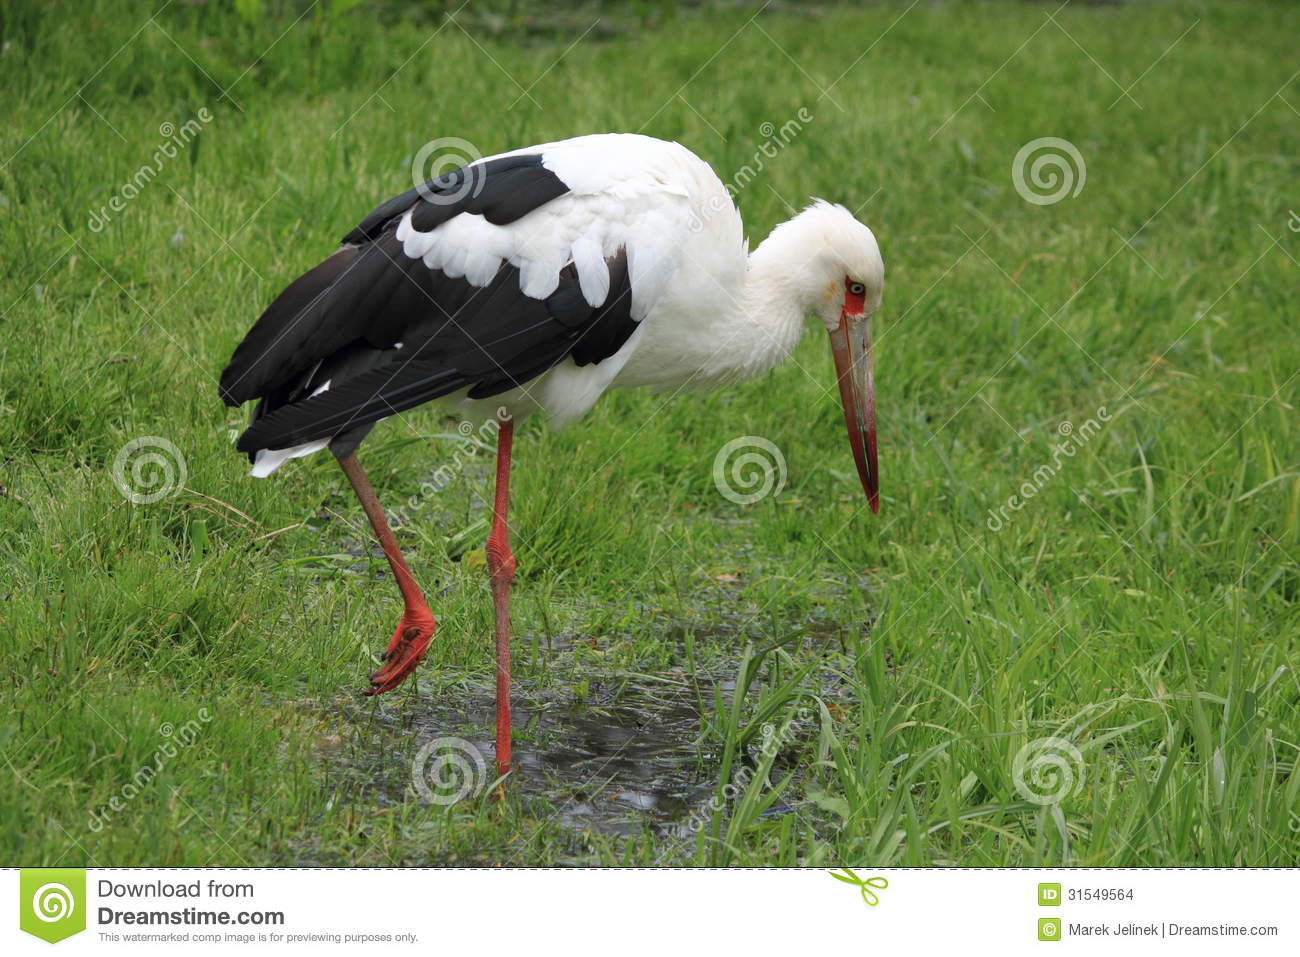 Maguari Stork High Quality Background on Wallpapers Vista